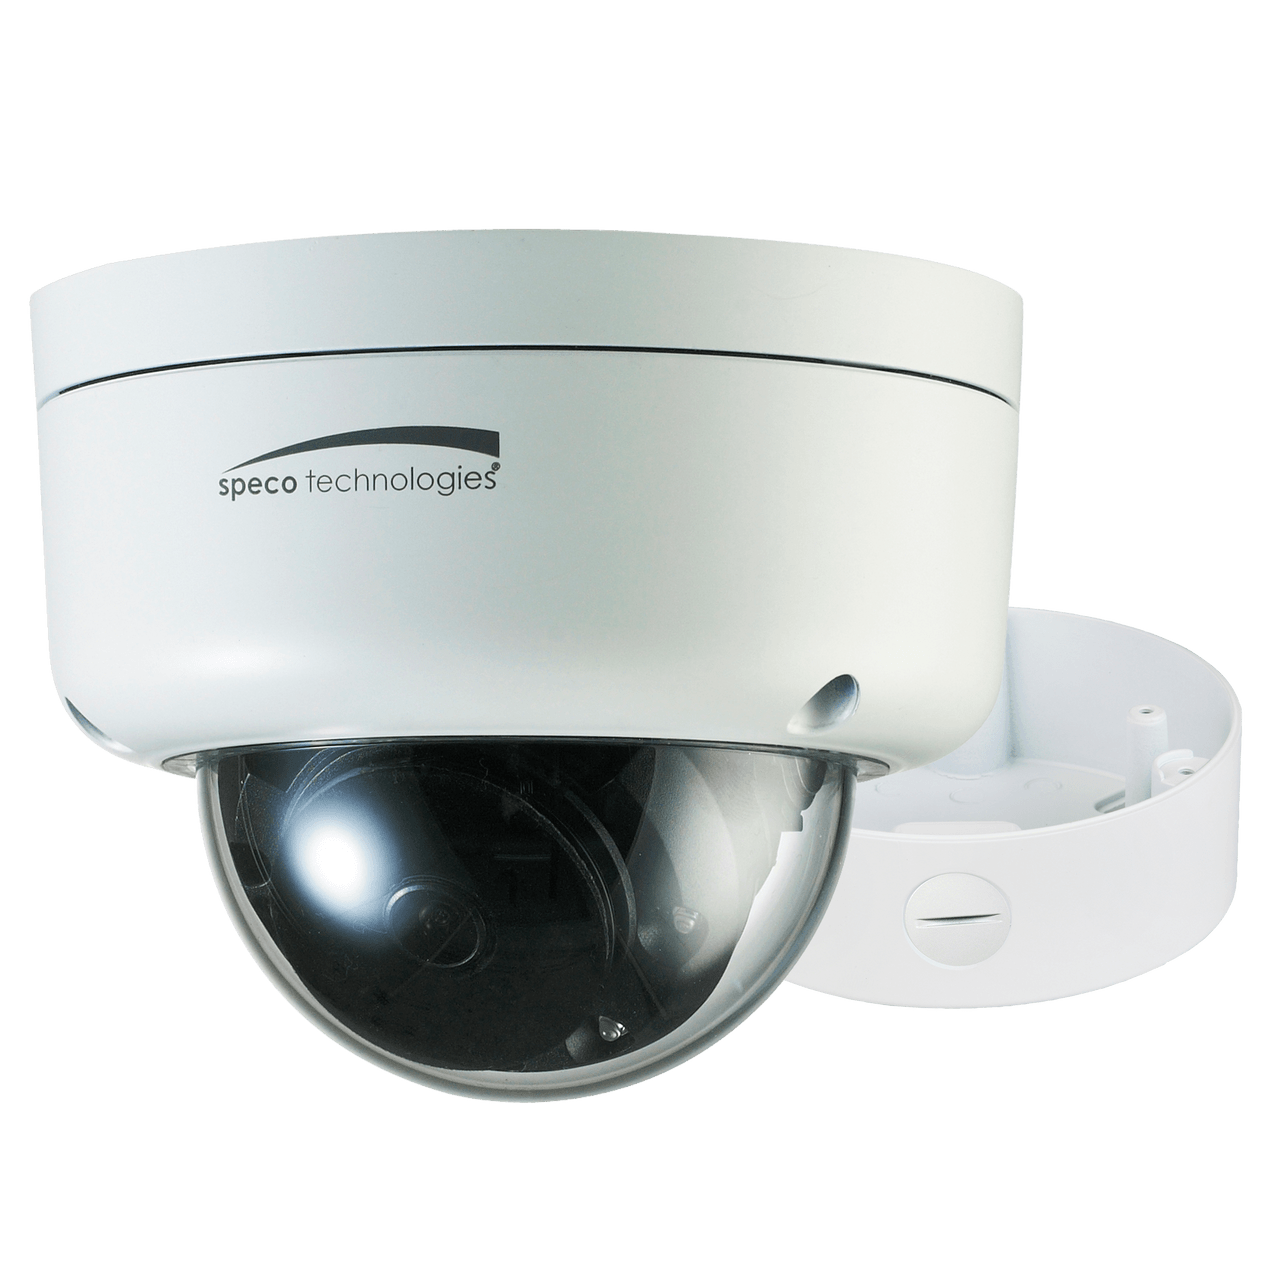 Speco Technologies SPE-O3FD8M 3MP FIT Vandal Dome IP Camera, 2.9-12mm motorized lens, White, TAA (SPE-O3FD8M)